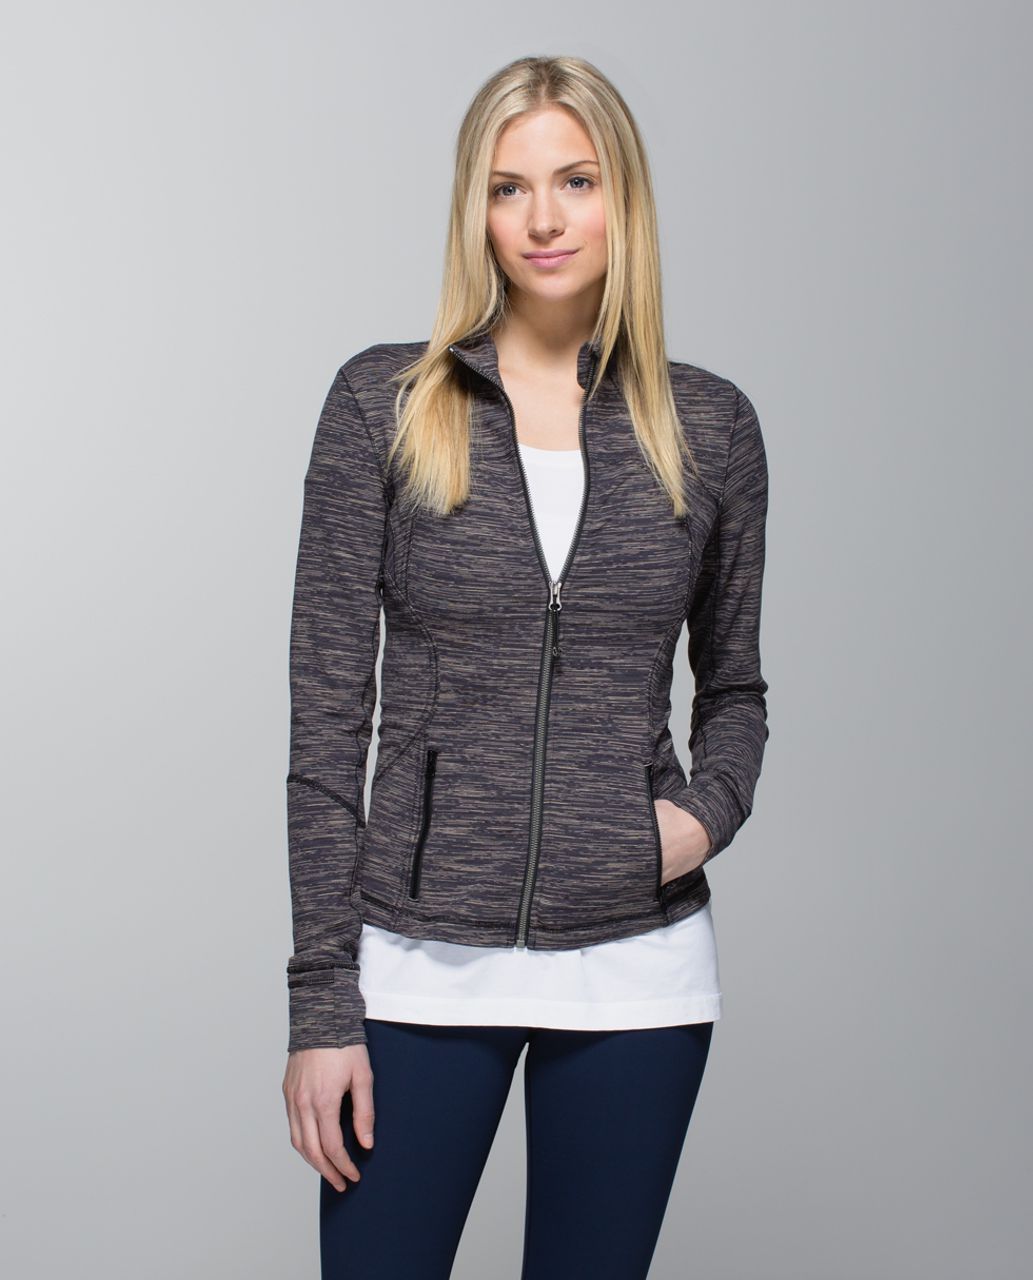 Lululemon Forme Jacket *Cuffins - Wee Are From Space Black Cashew